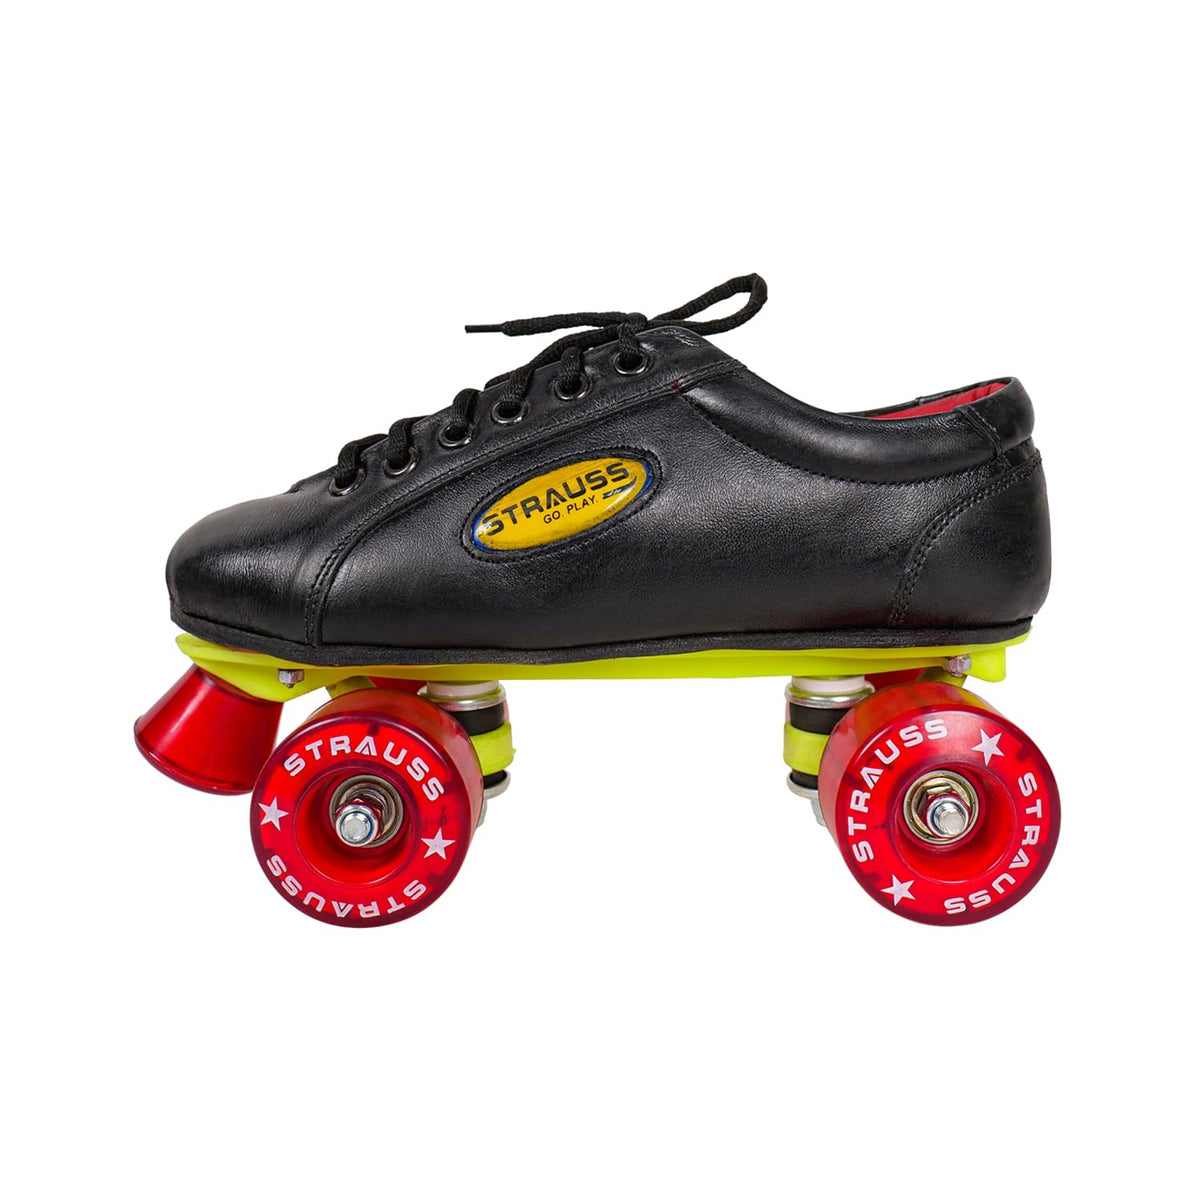 STRAUSS Gripper Skating Shoes | Fixed Body Roller Skates | Shoe Skate with PVC Wheel |Ideal for Boys, Girls and Kids |Suitable for All Skill Level | Ideal for Junior (13-14 Years) Size-6, (Red/Black)